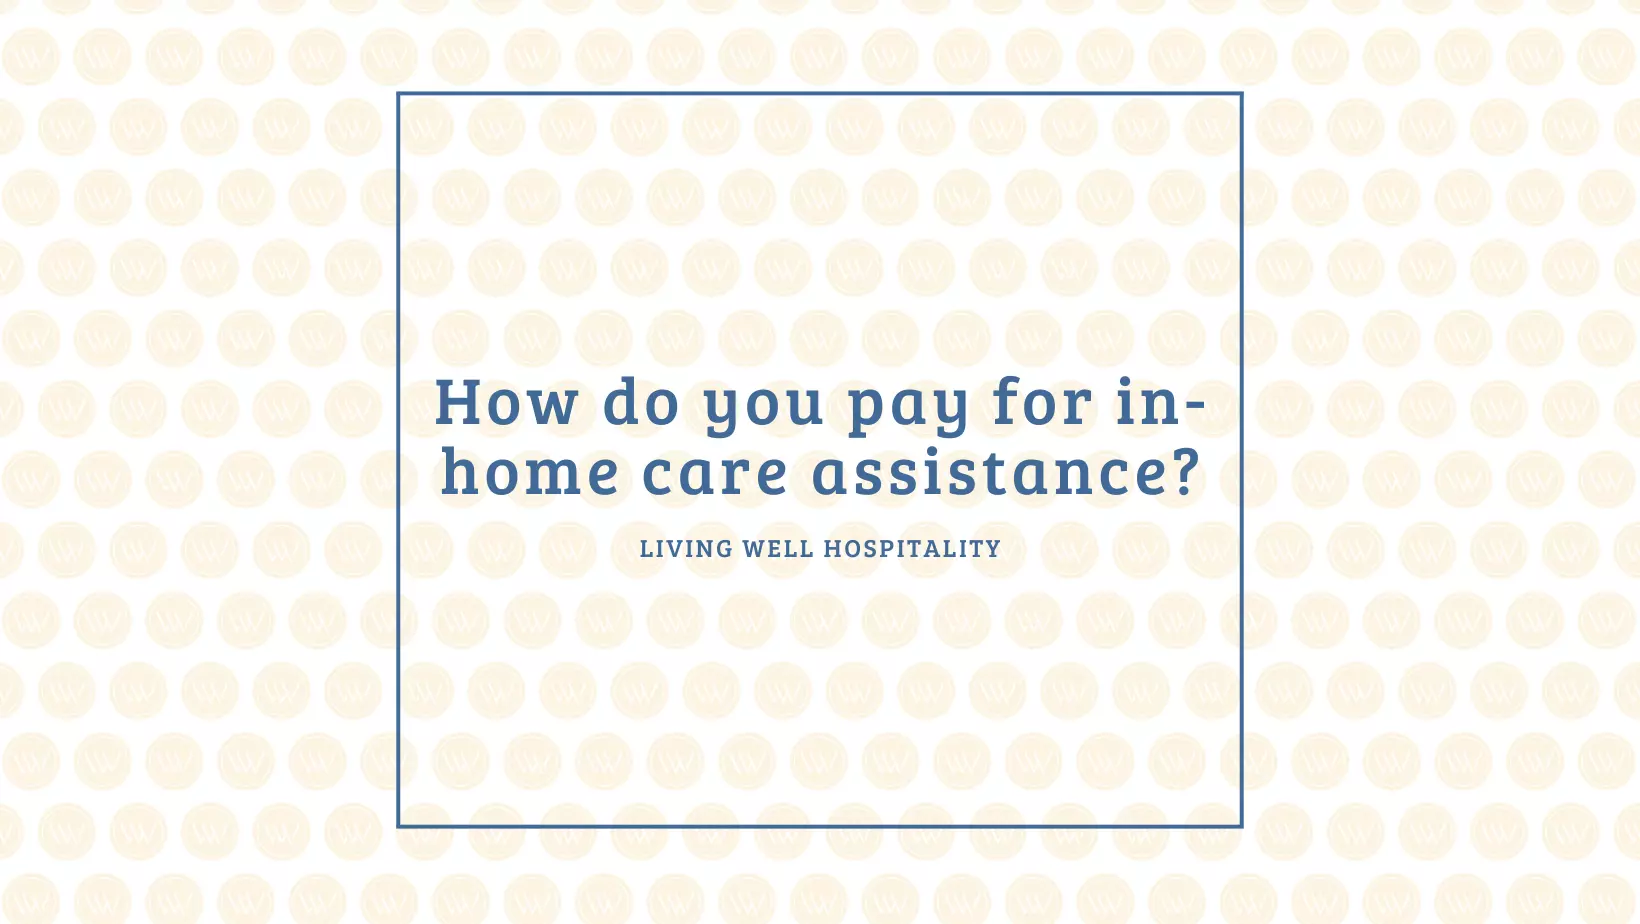 How do you pay for in-home care assistance